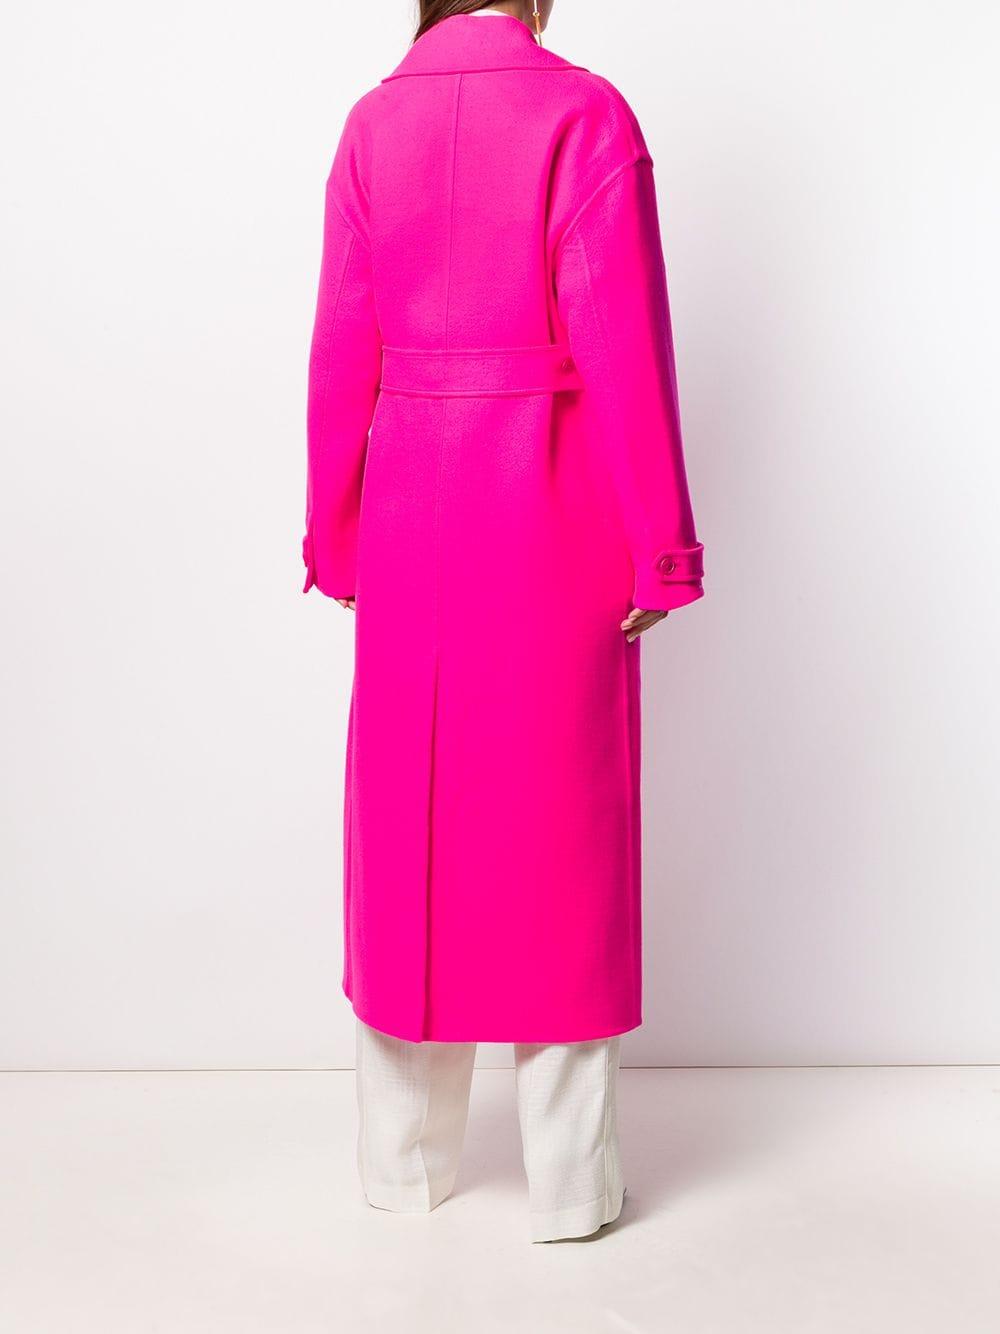 Jacquemus Sabe Oversized Neon Wool Trench Coat in Pink | Lyst